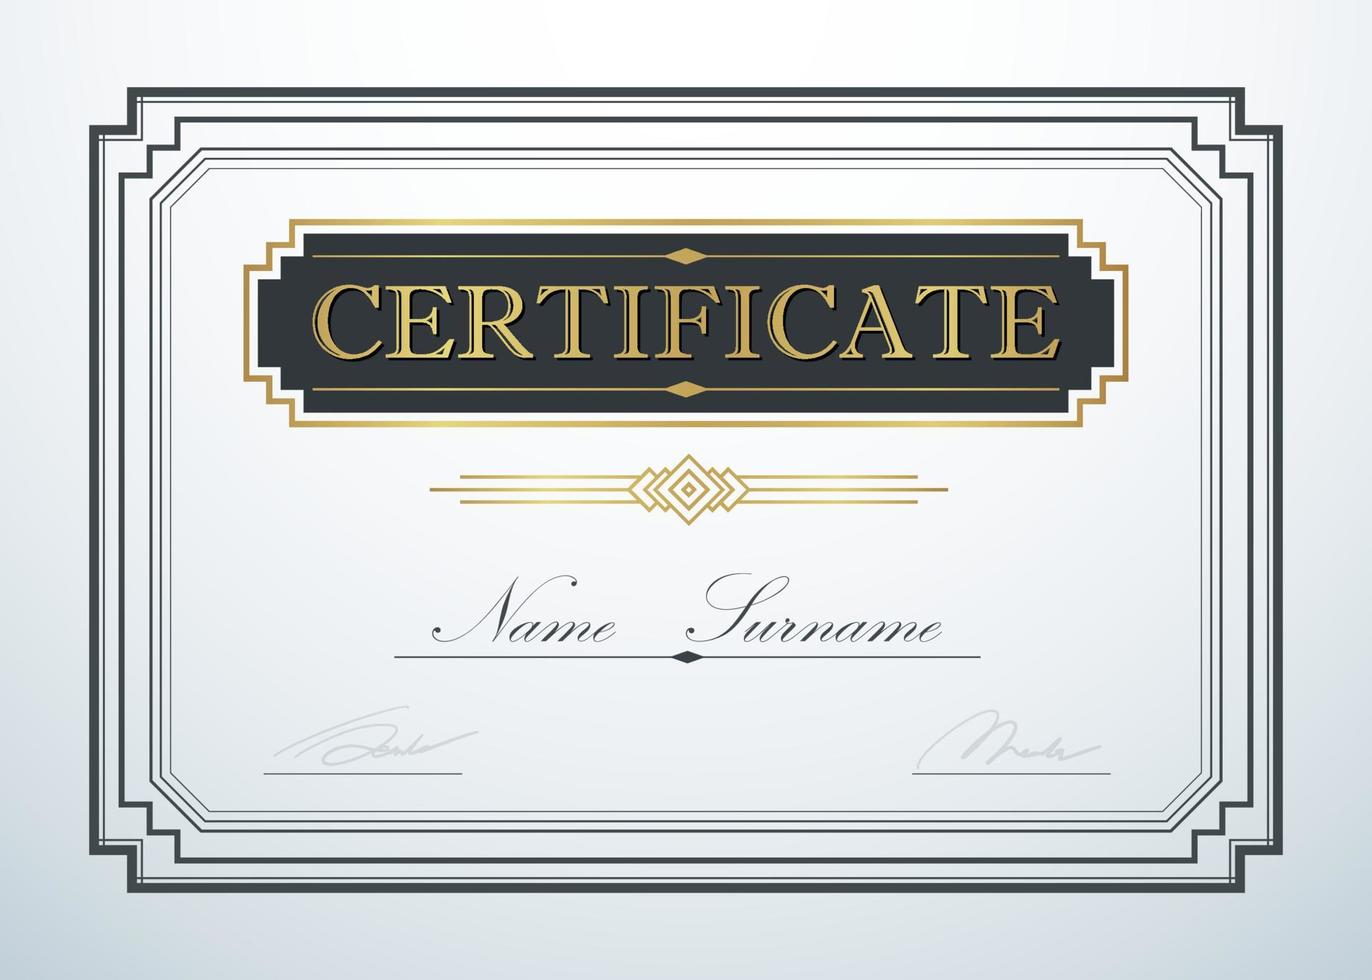 Certificate border frame template guide design. Chinese style vector